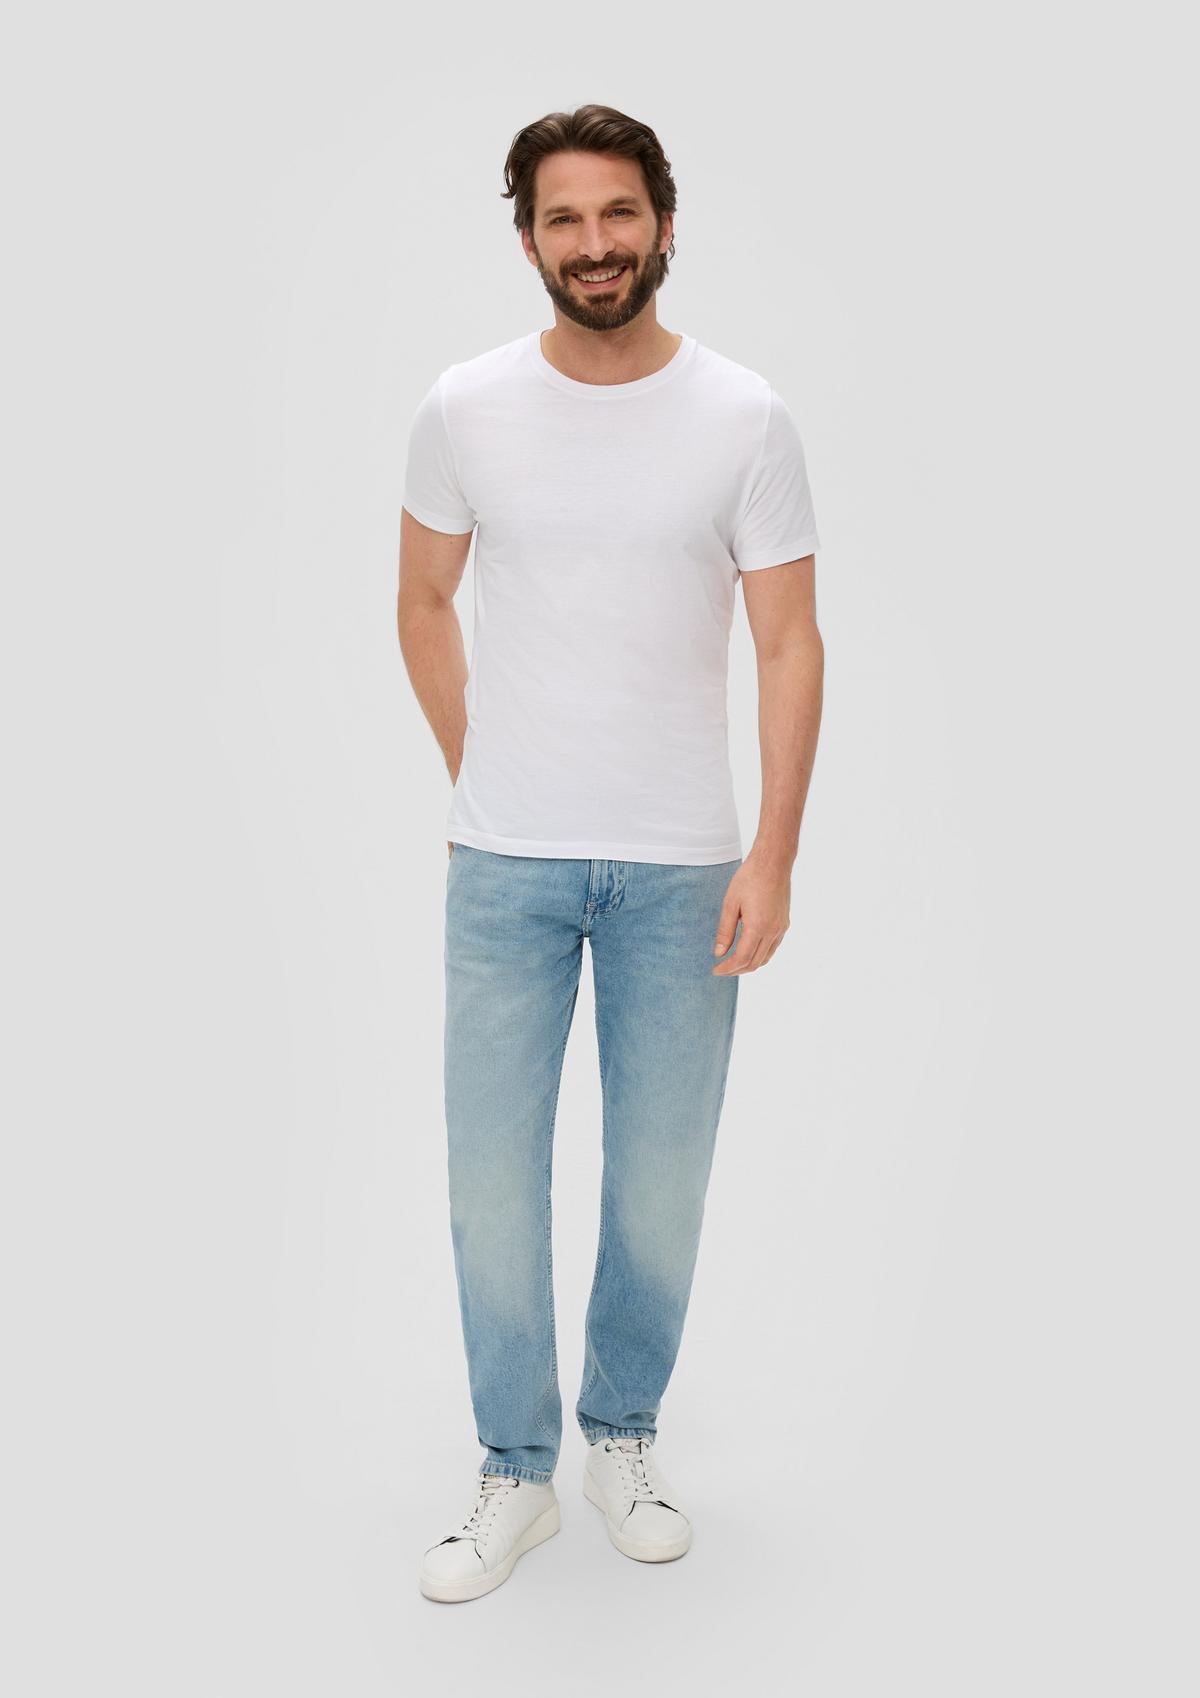 Jean Mauro / coupe Regular Fit / taille haute / Tapered Leg